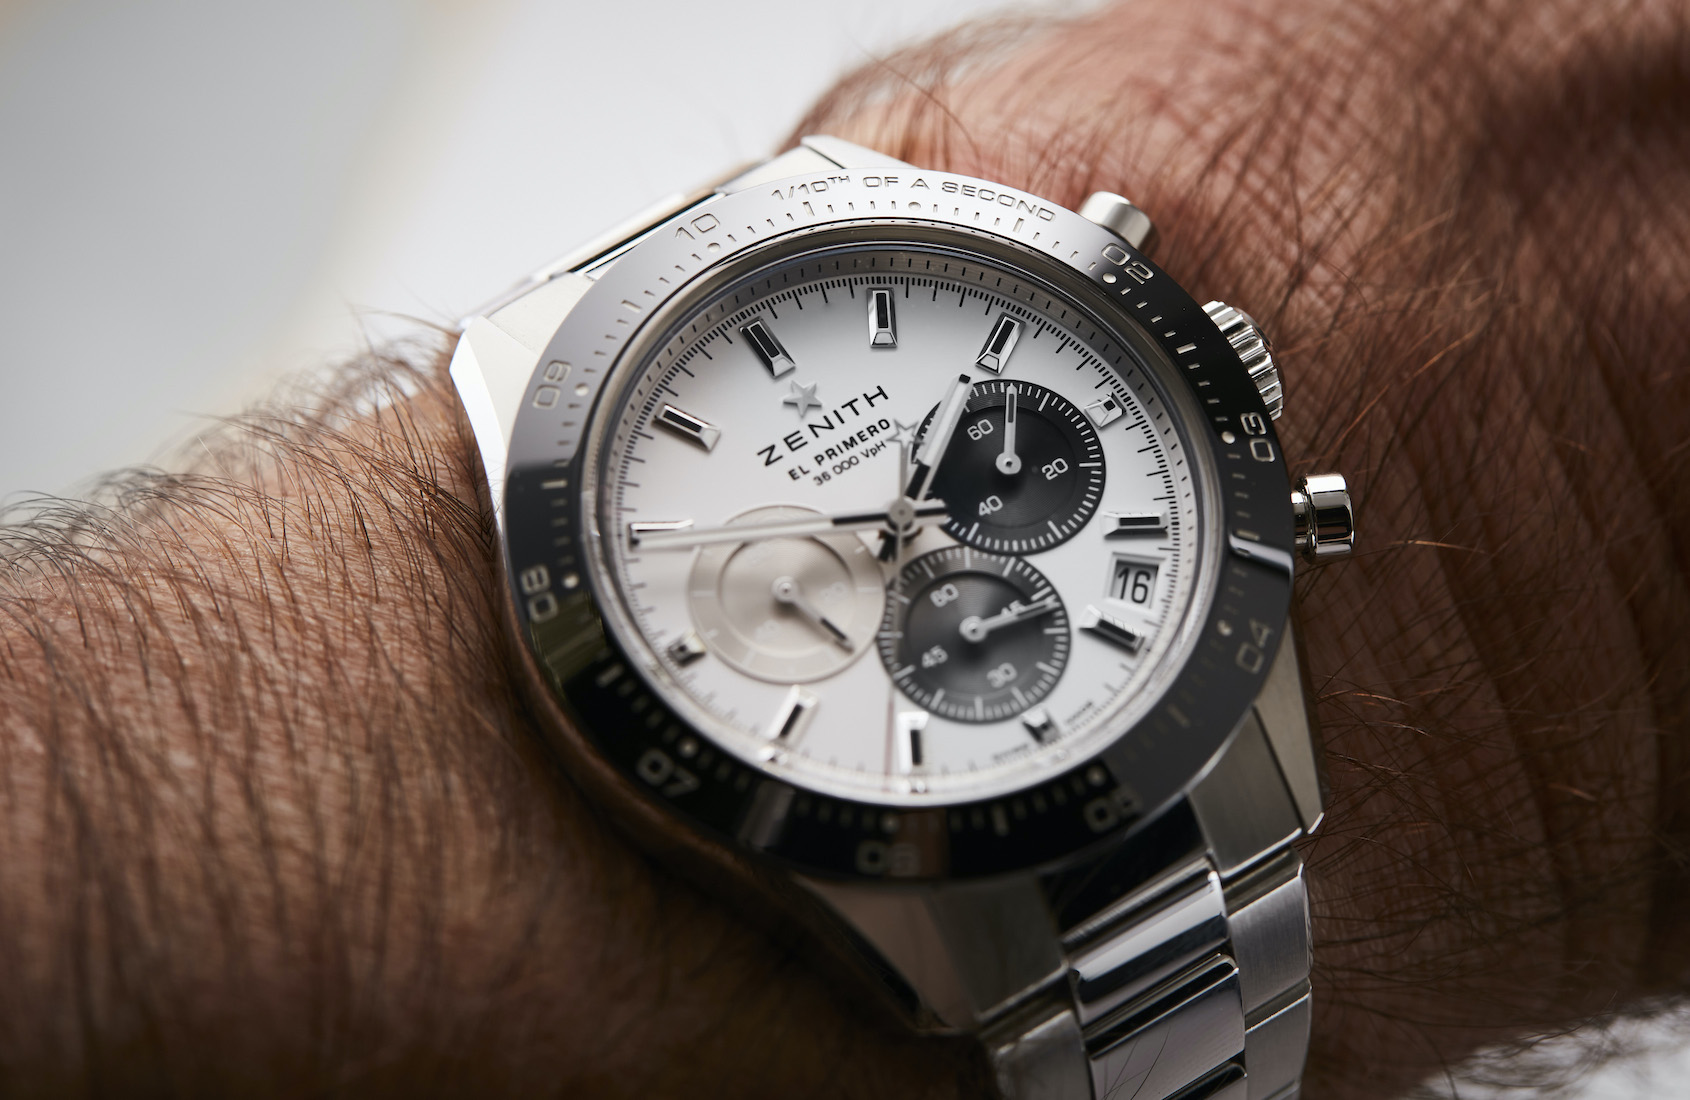 A month on the wrist with the Zenith Chronomaster Sport, the most hyped watch of 2021 so far